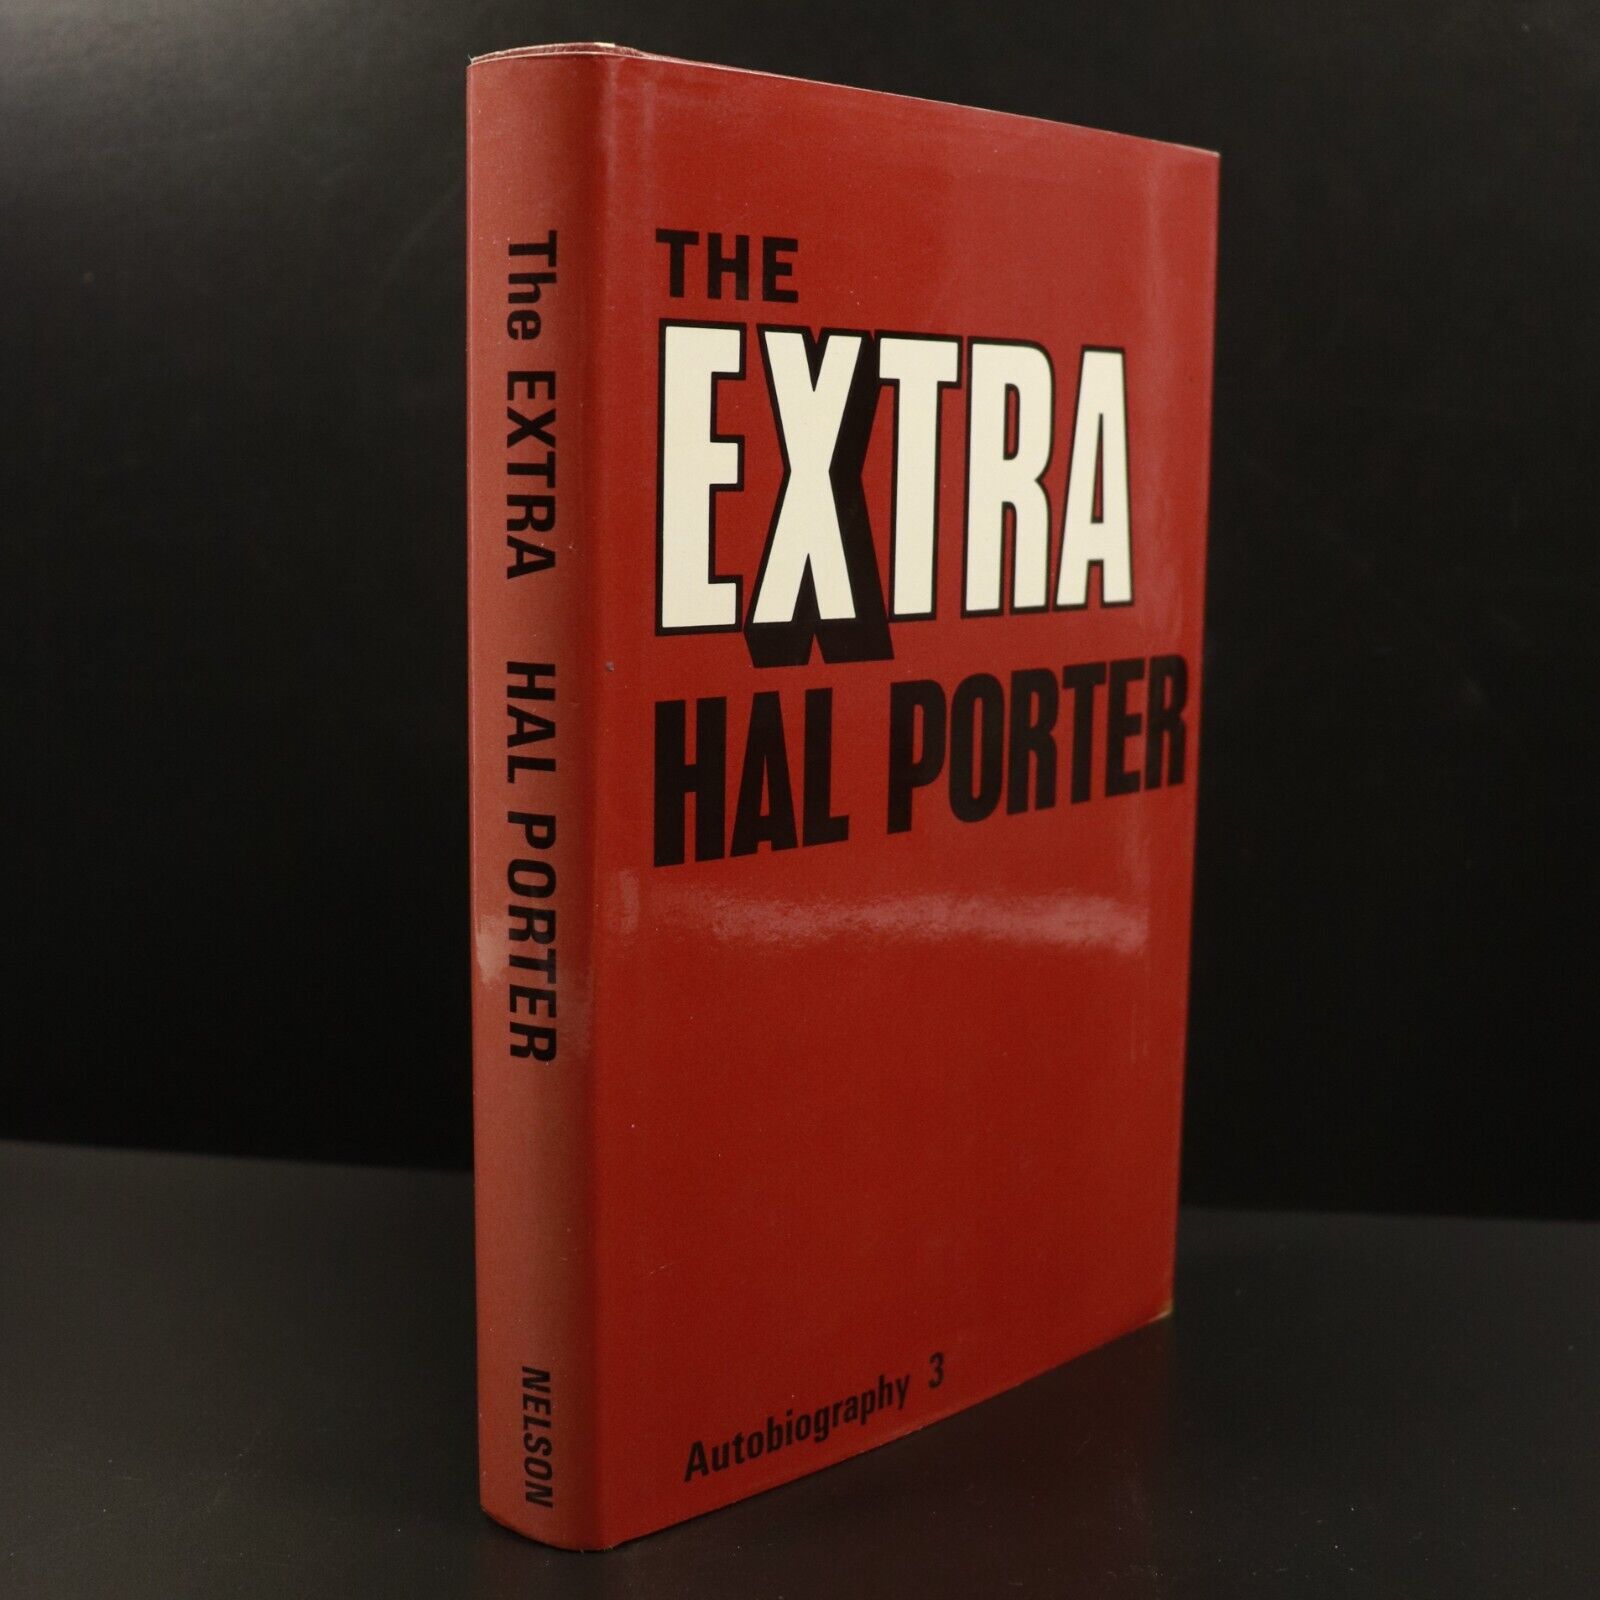 1975 The Extra by Hal Porter Vintage Australian History Book